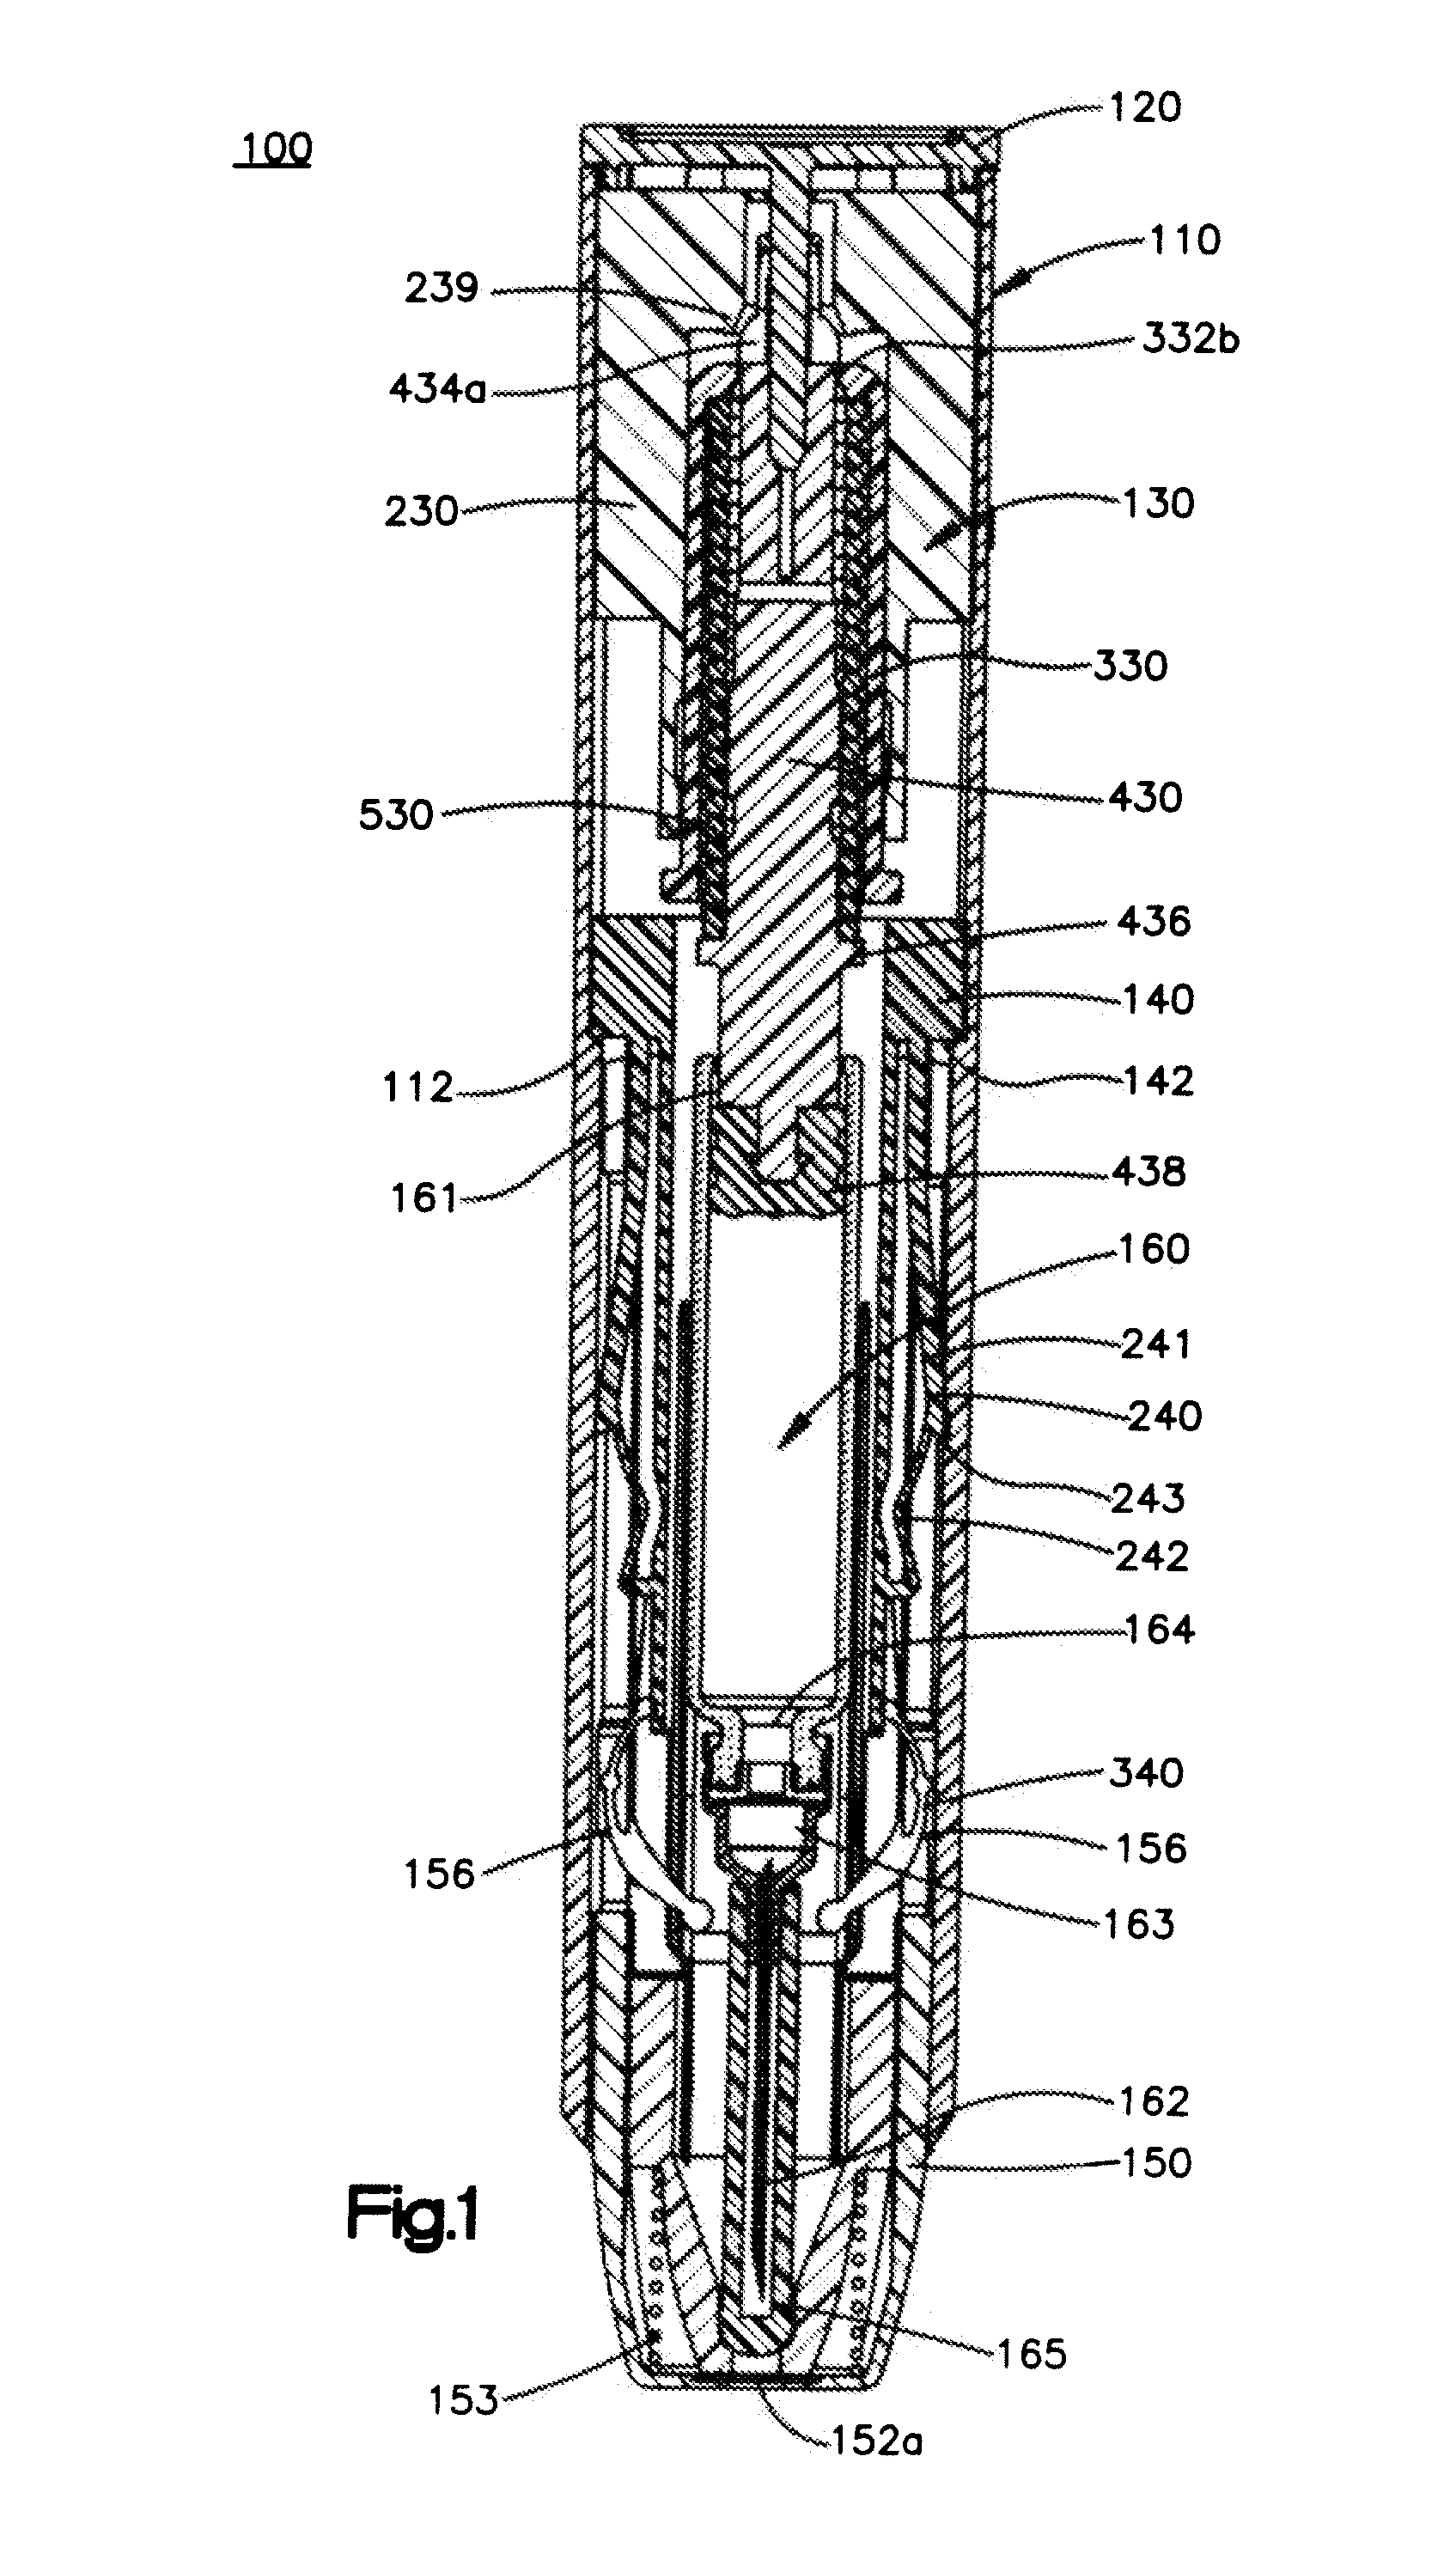 Automatic injector with kickback attenuation